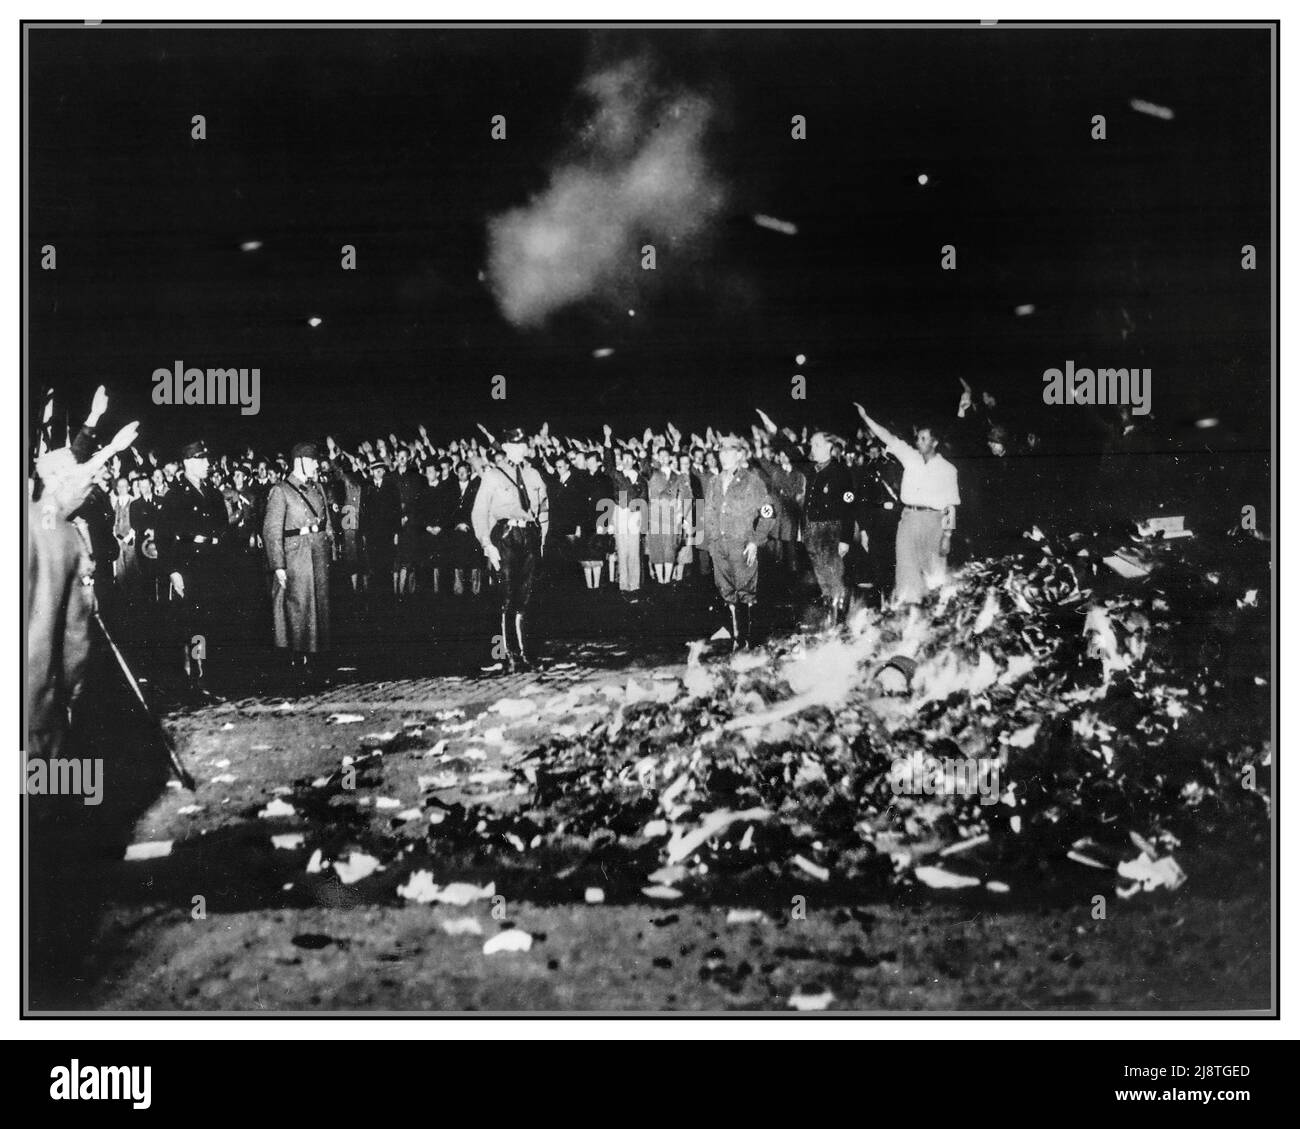 NAZI BOOK BURNING CENSORSHIP 1933 Thousands of books smoulder in a huge bonfire as Germans give the Nazi salute during the wave of book-burnings that spread throughout Nazi Germany in the 1930s Book burning--Germany--1930-1940 Nazis--Germany--1930-1940 World War II--United States War posters--United States--1940-1950 Stock Photo